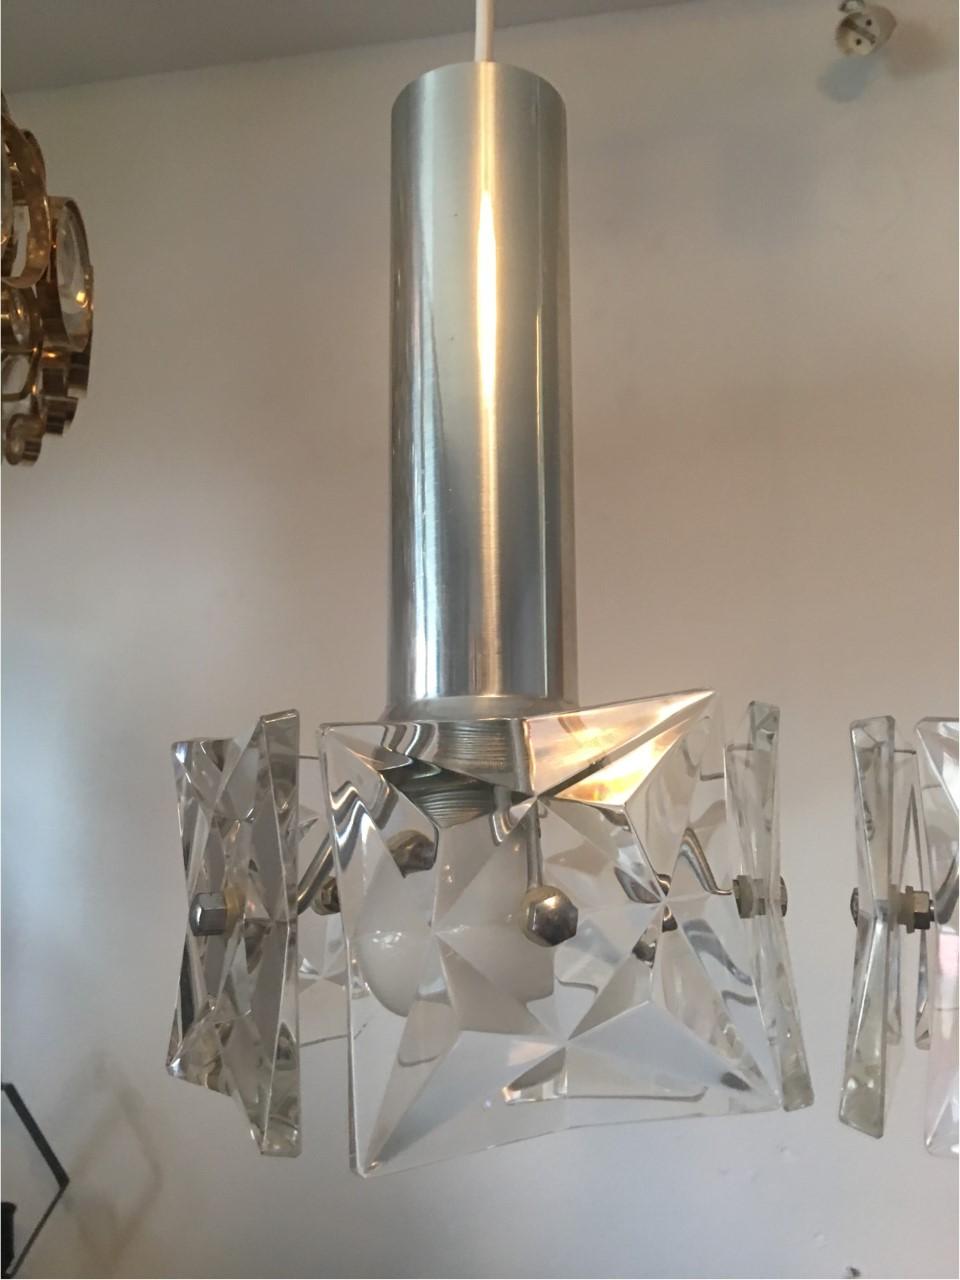 One pair of 1970s pendants with faceted square crystal shades. Each fixture requires one European E 27 Edison bulb, each bulb up to 60 watts. In good working condition. Equipped with original 20th century European wiring.